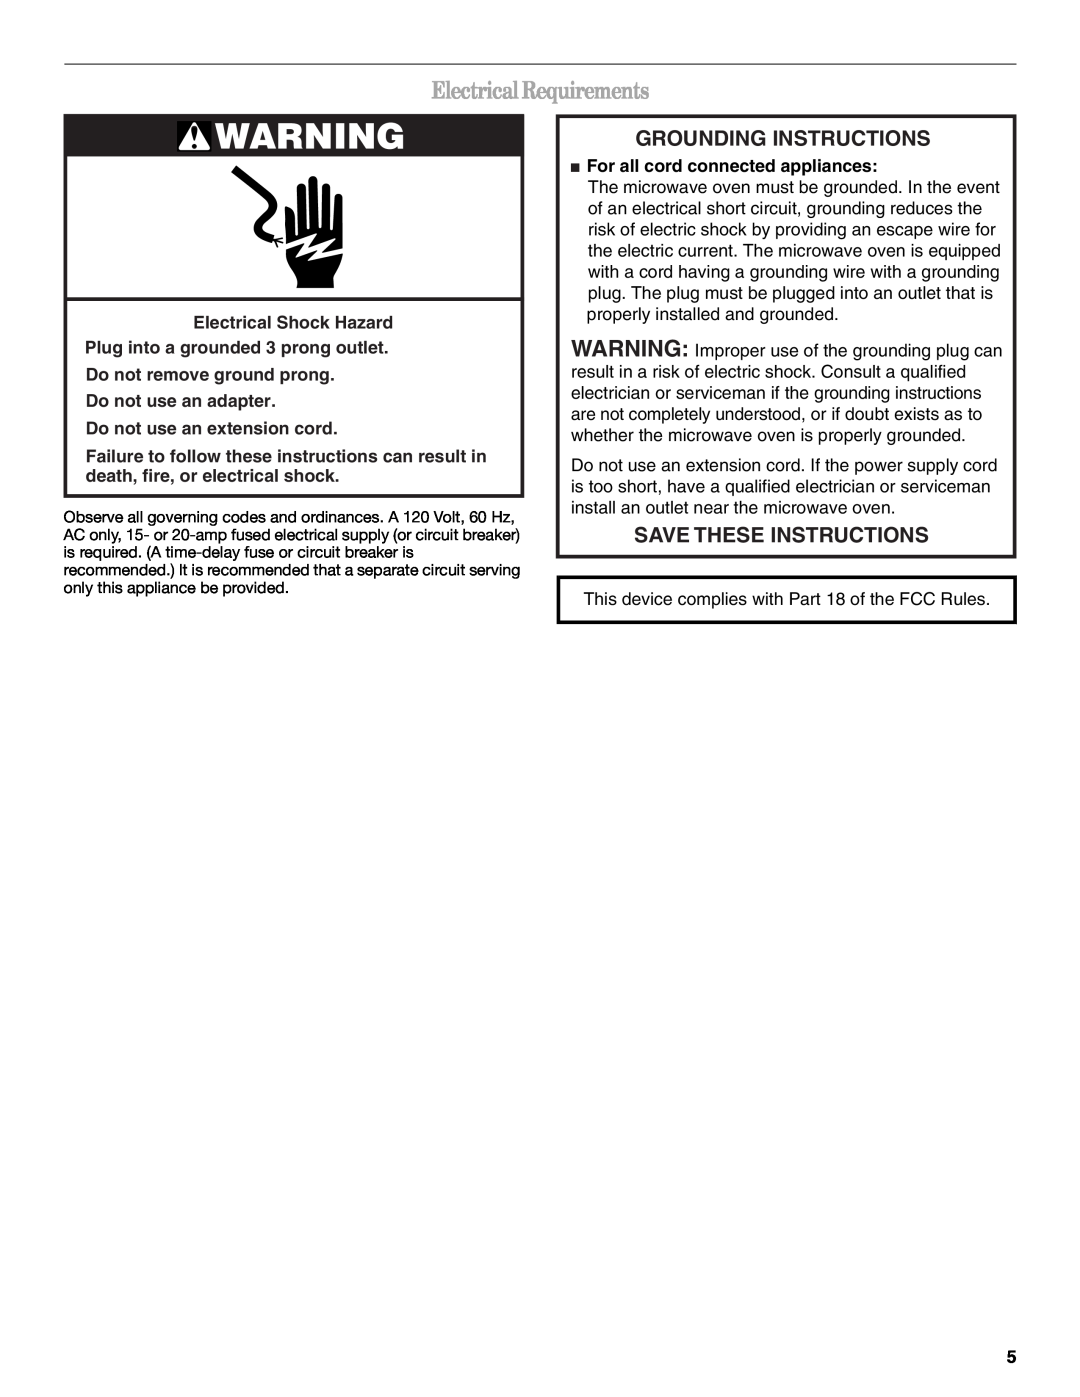 Whirlpool IOR14XR Electrical Requirements, Grounding Instructions, Save These Instructions, Do not use an extension cord 